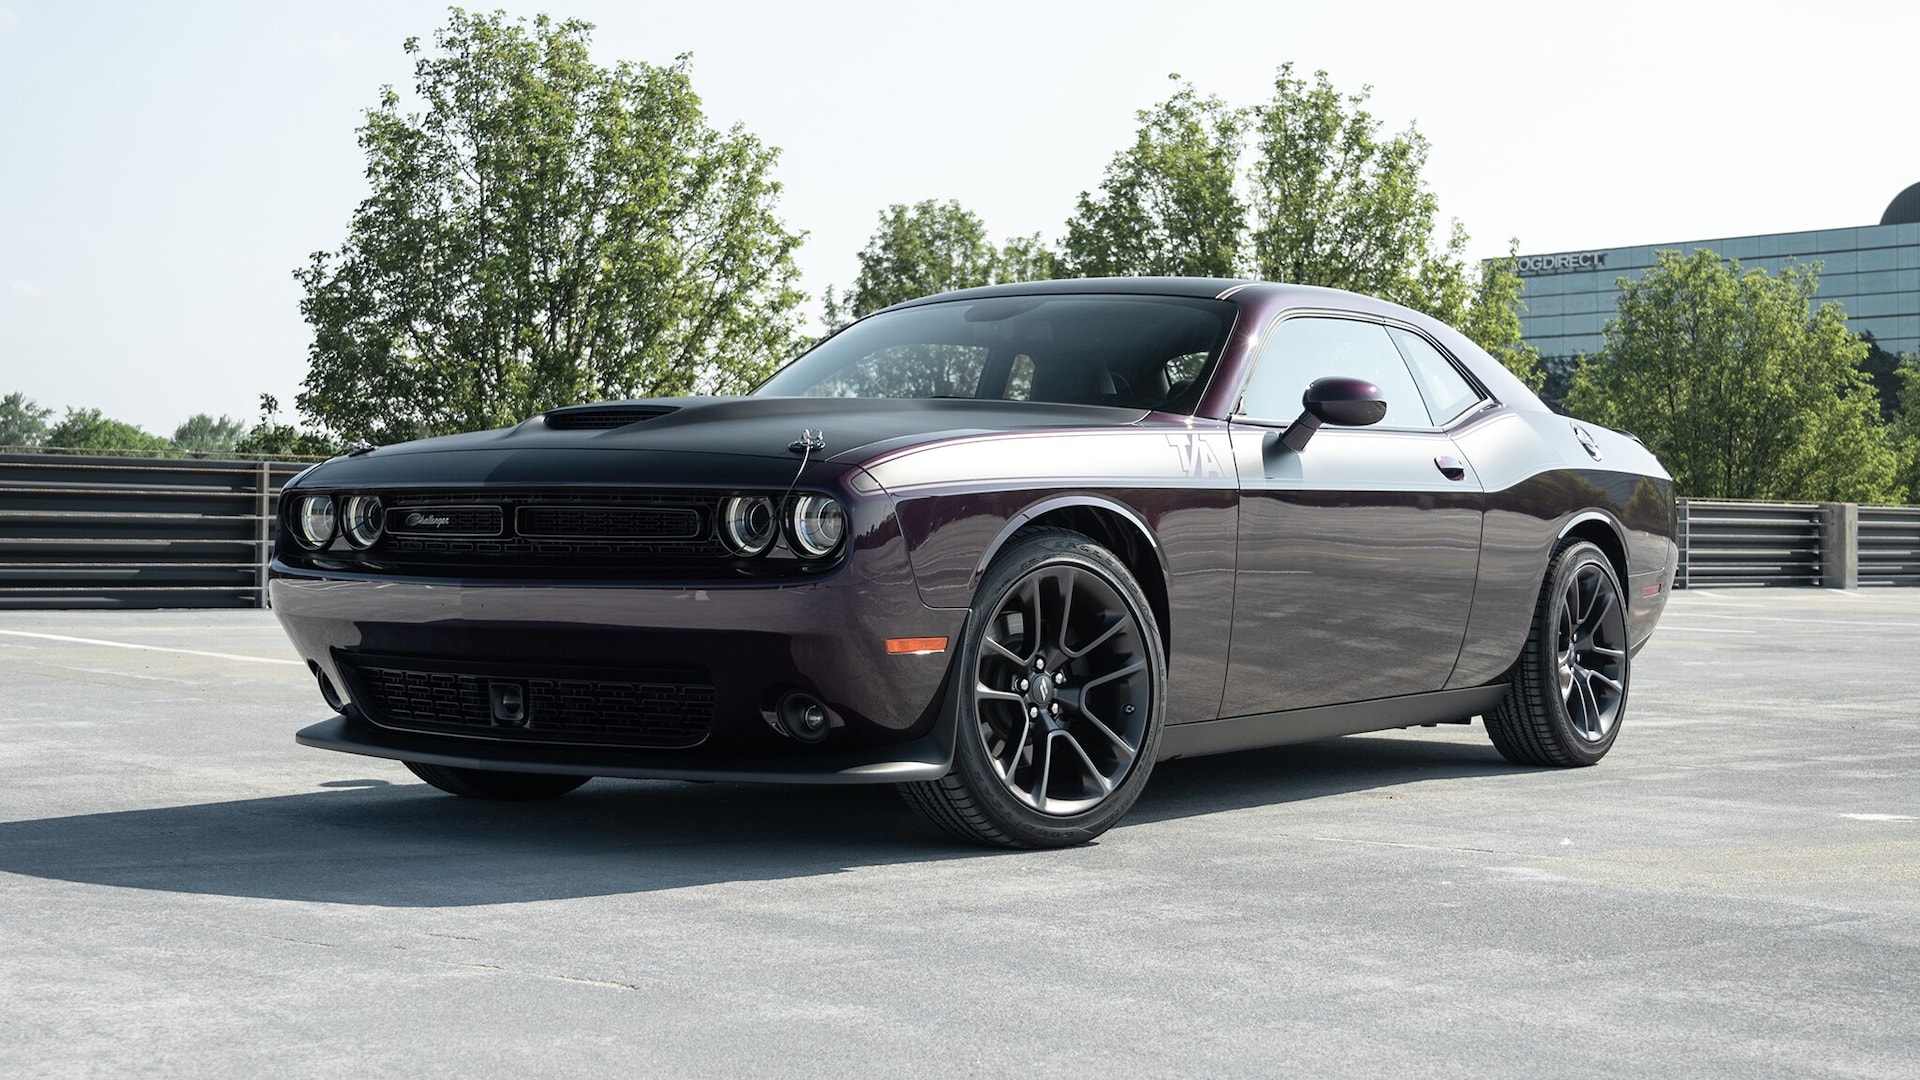 2022 Dodge Challenger Prices, Reviews, and Photos - MotorTrend